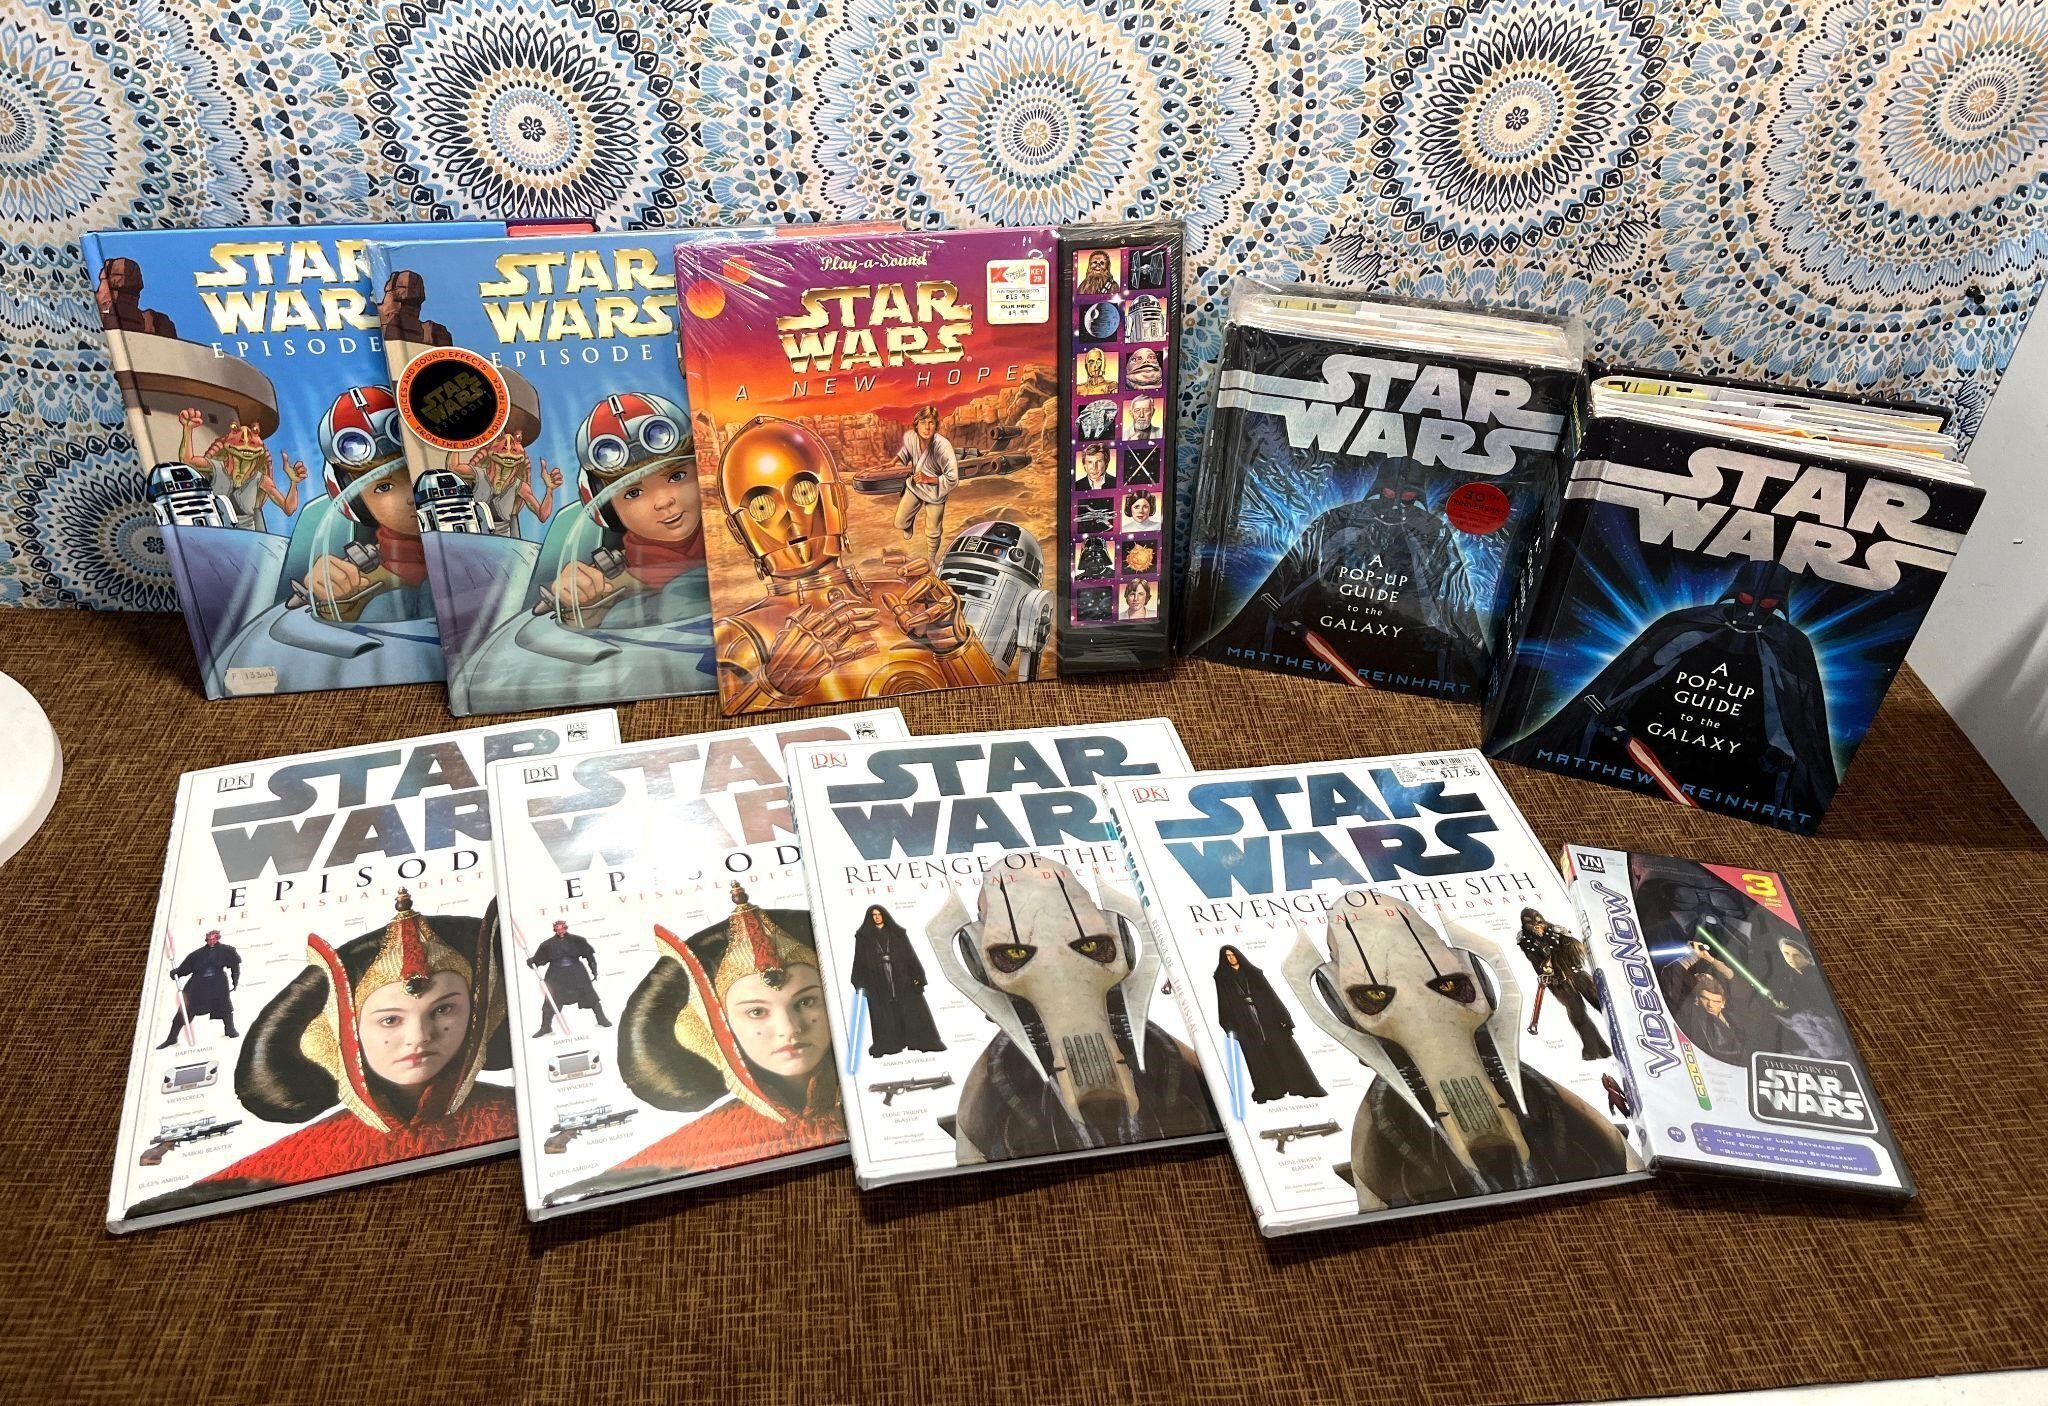 Star Wars Book & Video Now Lot - Qty 10